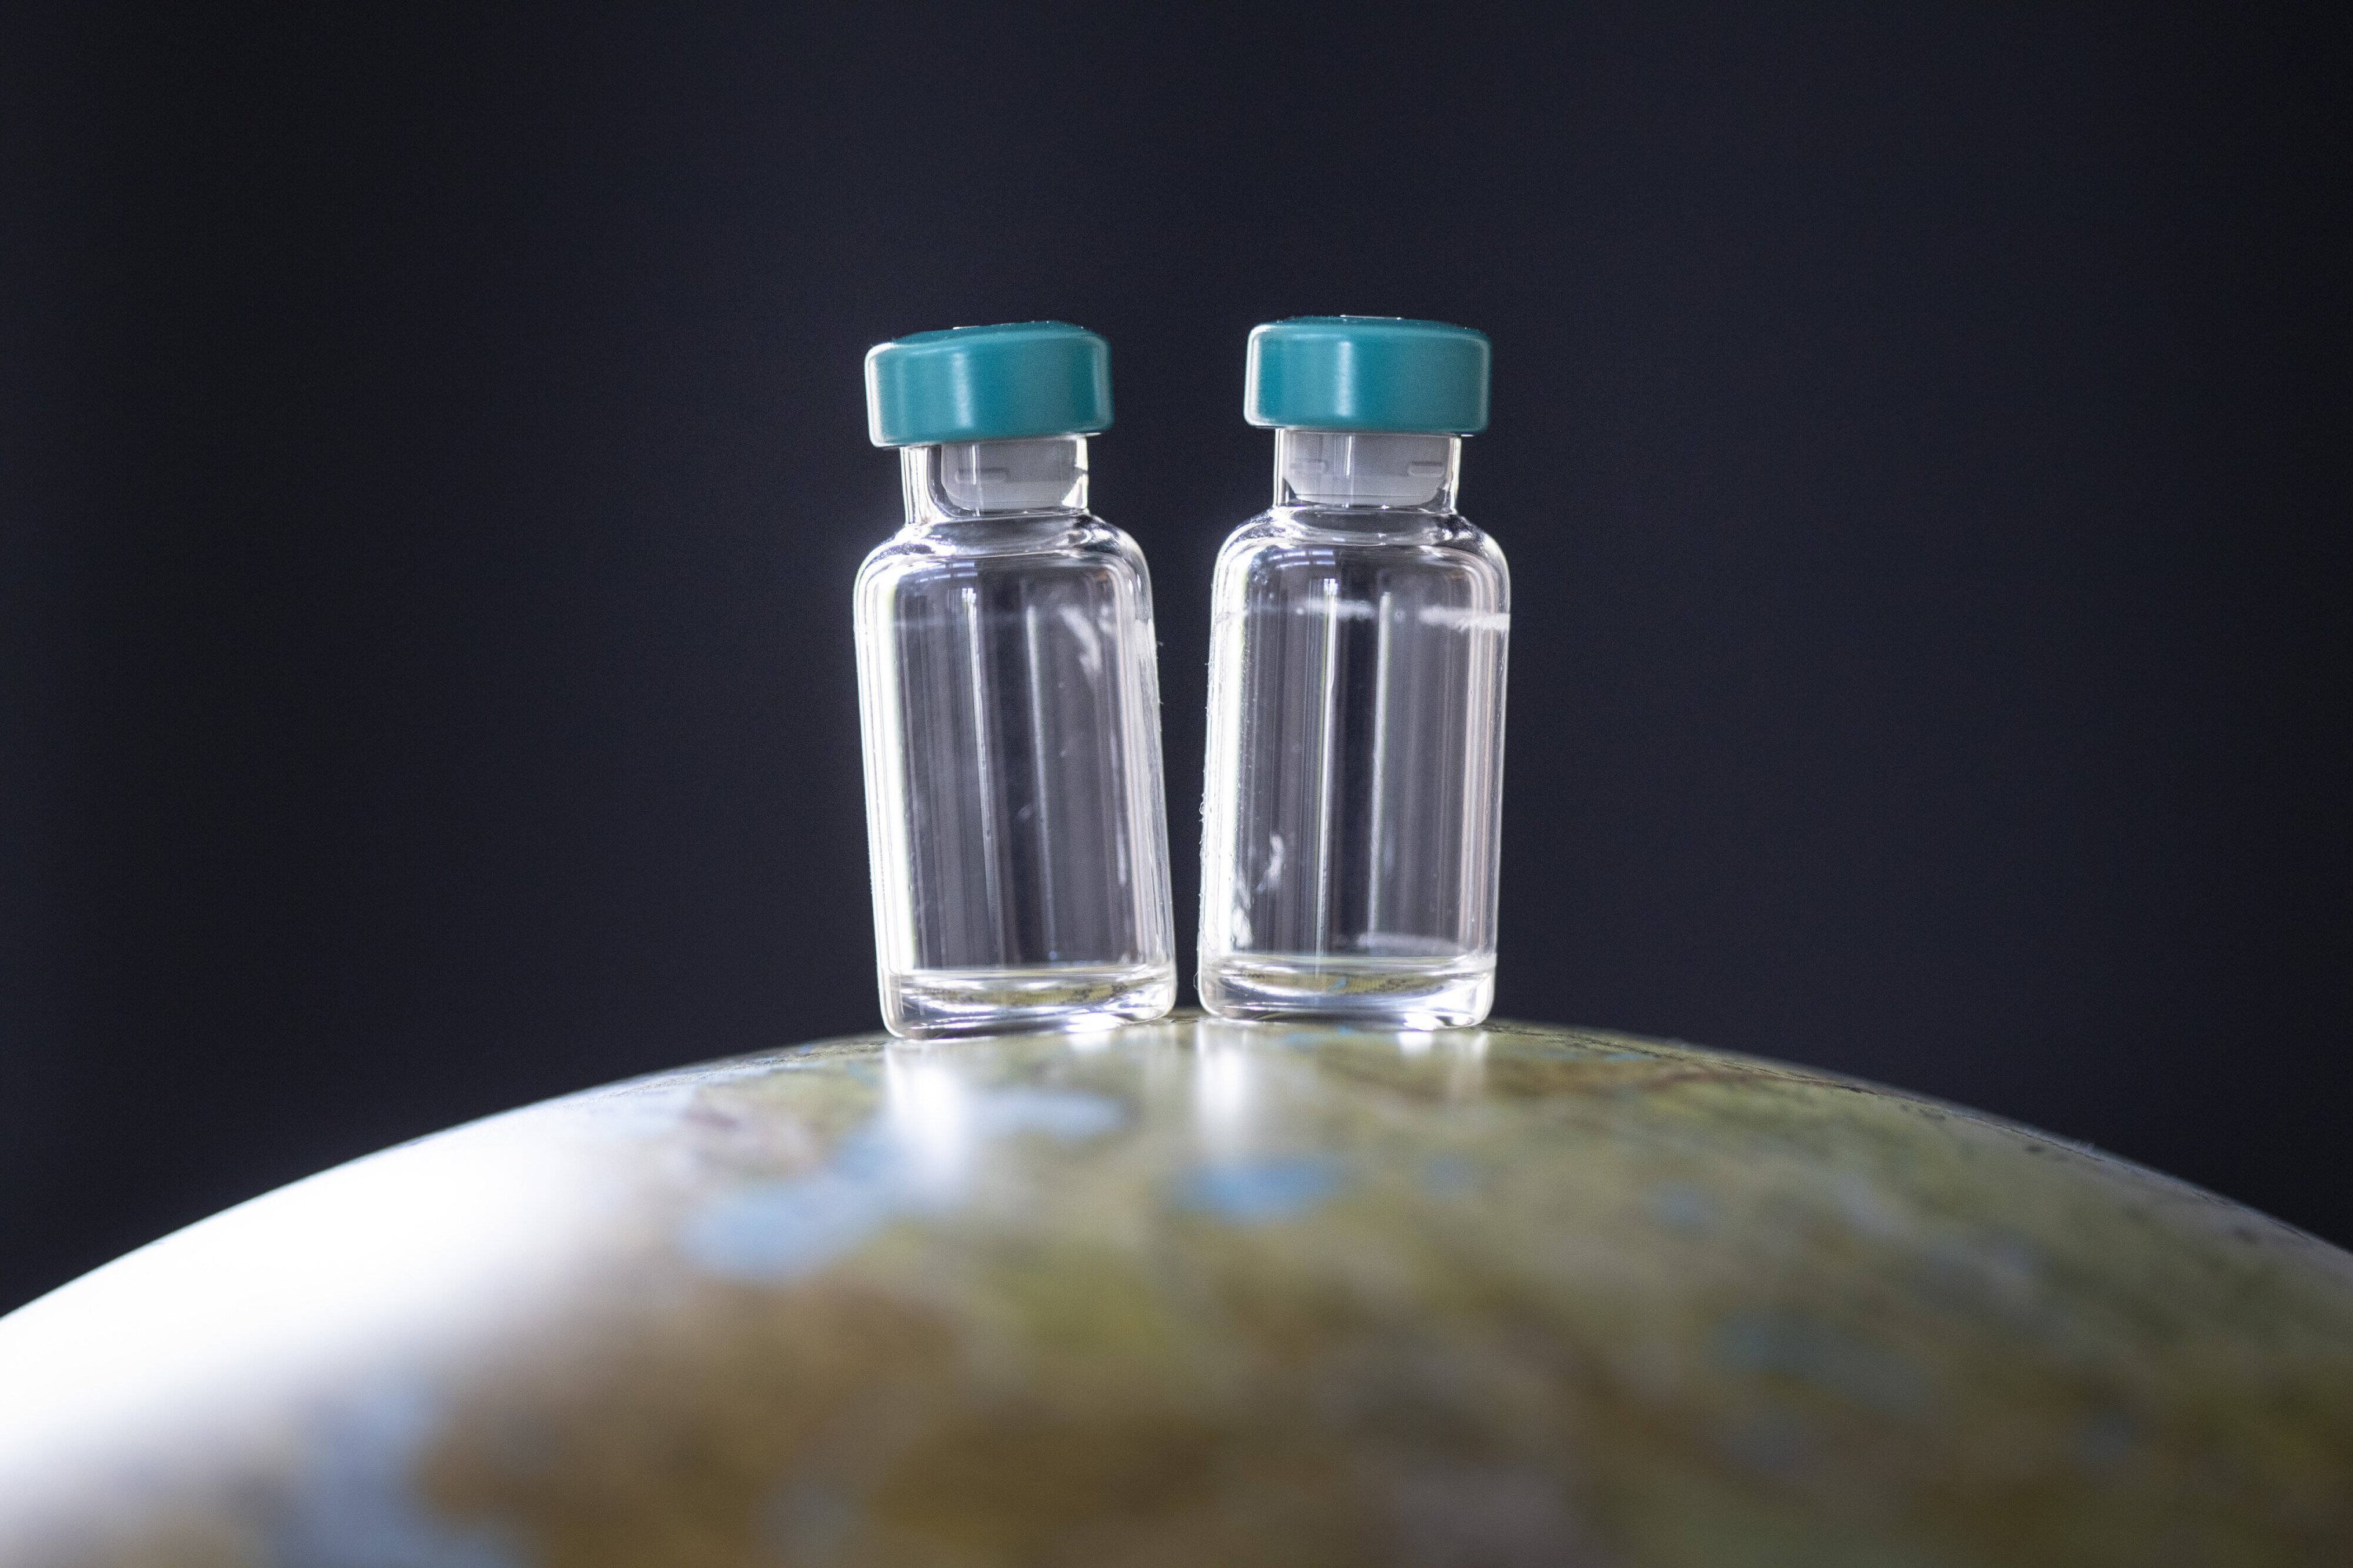 Two vaccine doses are seen on a globe in Bonn, Germany.(UtexGrabowsky/photothek.netx via Reuters)